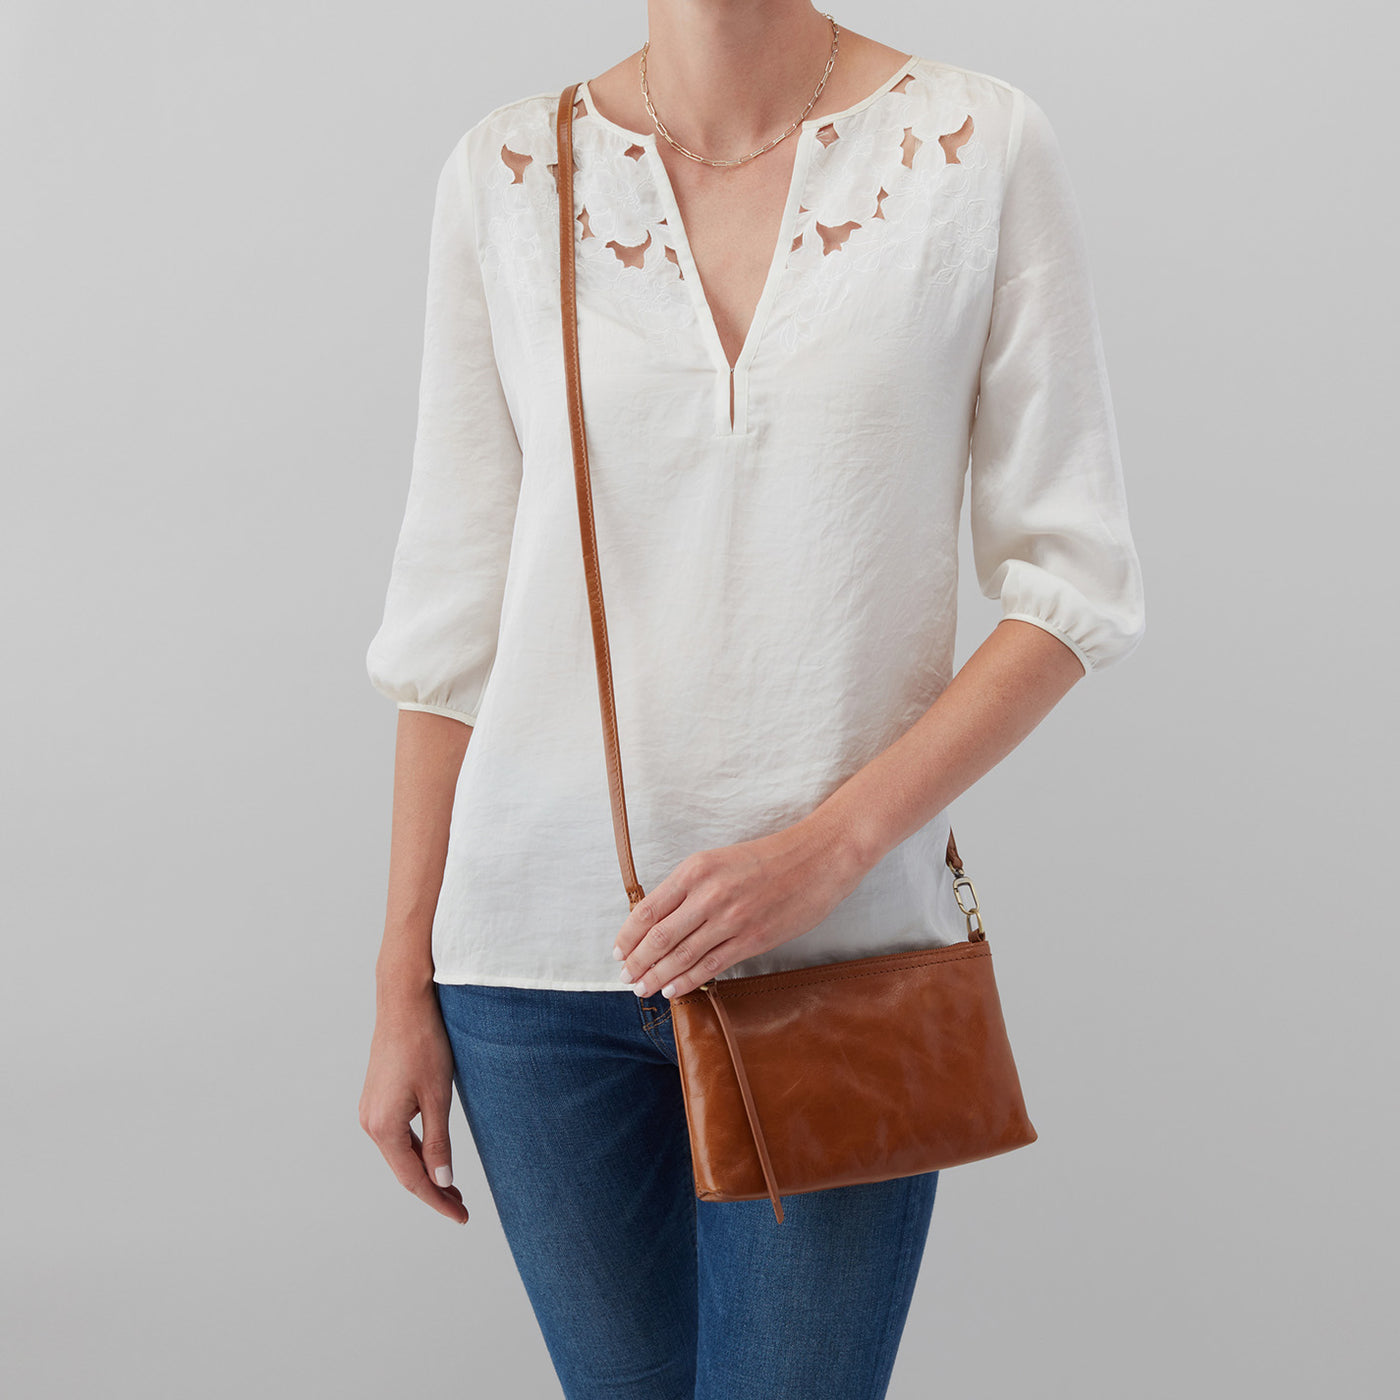 Darcy Crossbody in Polished Leather - Warm Amber